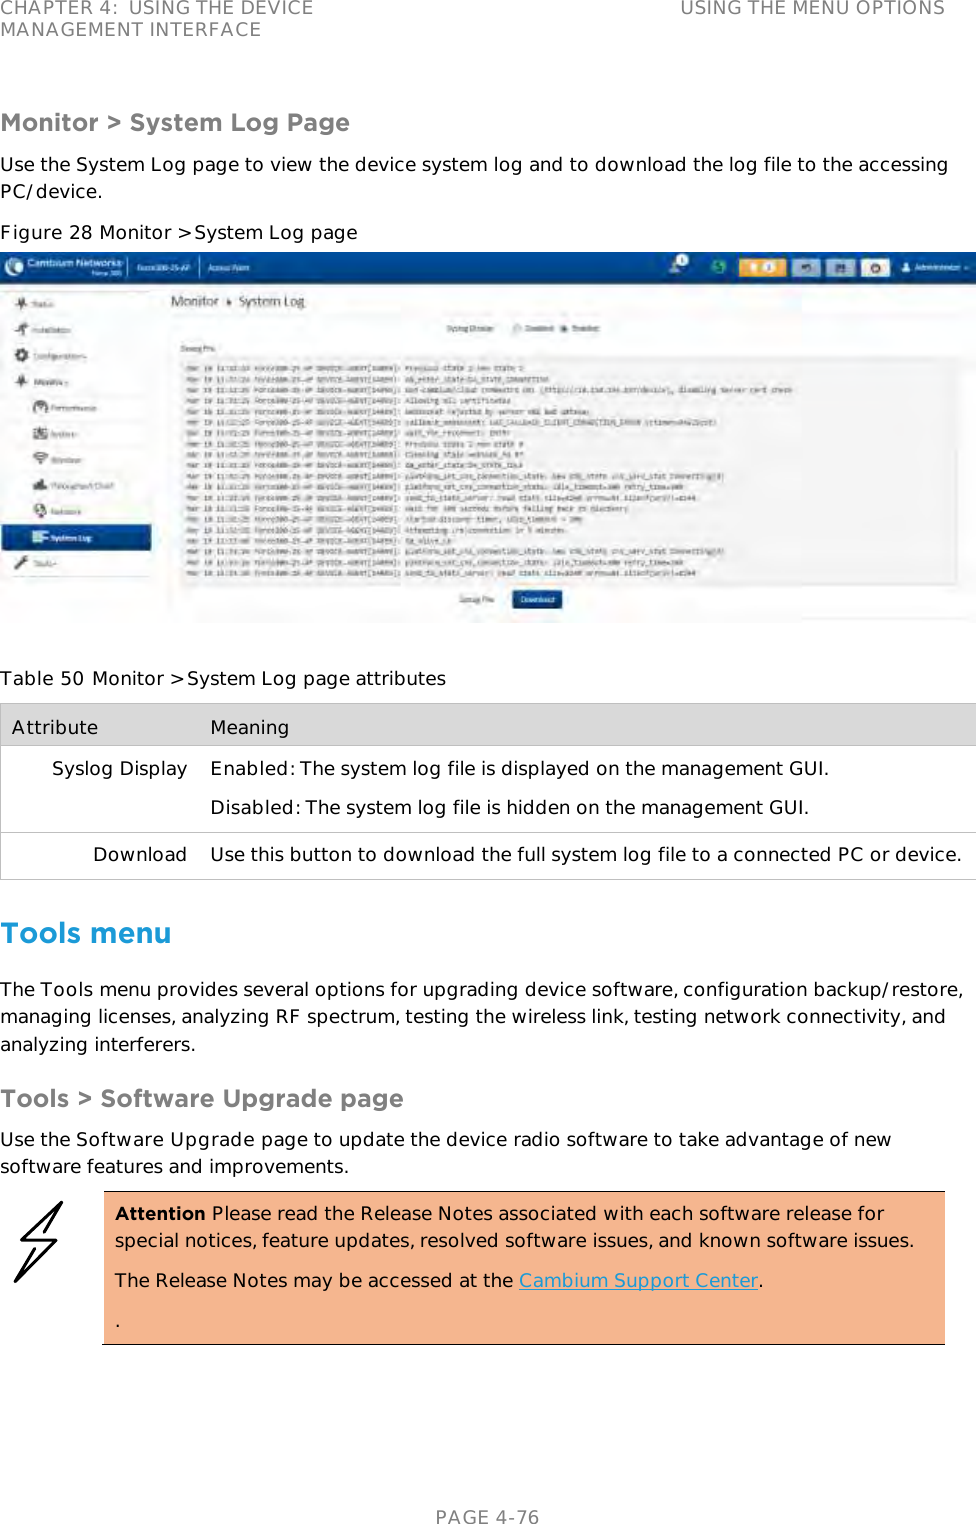 CHAPTER 4:  USING THE DEVICE MANAGEMENT INTERFACE USING THE MENU OPTIONS   PAGE 4-76 Monitor &gt; System Log Page Use the System Log page to view the device system log and to download the log file to the accessing PC/device. Figure 28 Monitor &gt; System Log page   Table 50 Monitor &gt; System Log page attributes Attribute Meaning Syslog Display Enabled: The system log file is displayed on the management GUI. Disabled: The system log file is hidden on the management GUI. Download Use this button to download the full system log file to a connected PC or device. Tools menu The Tools menu provides several options for upgrading device software, configuration backup/restore, managing licenses, analyzing RF spectrum, testing the wireless link, testing network connectivity, and analyzing interferers. Tools &gt; Software Upgrade page Use the Software Upgrade page to update the device radio software to take advantage of new software features and improvements.  Attention Please read the Release Notes associated with each software release for special notices, feature updates, resolved software issues, and known software issues. The Release Notes may be accessed at the Cambium Support Center. .  